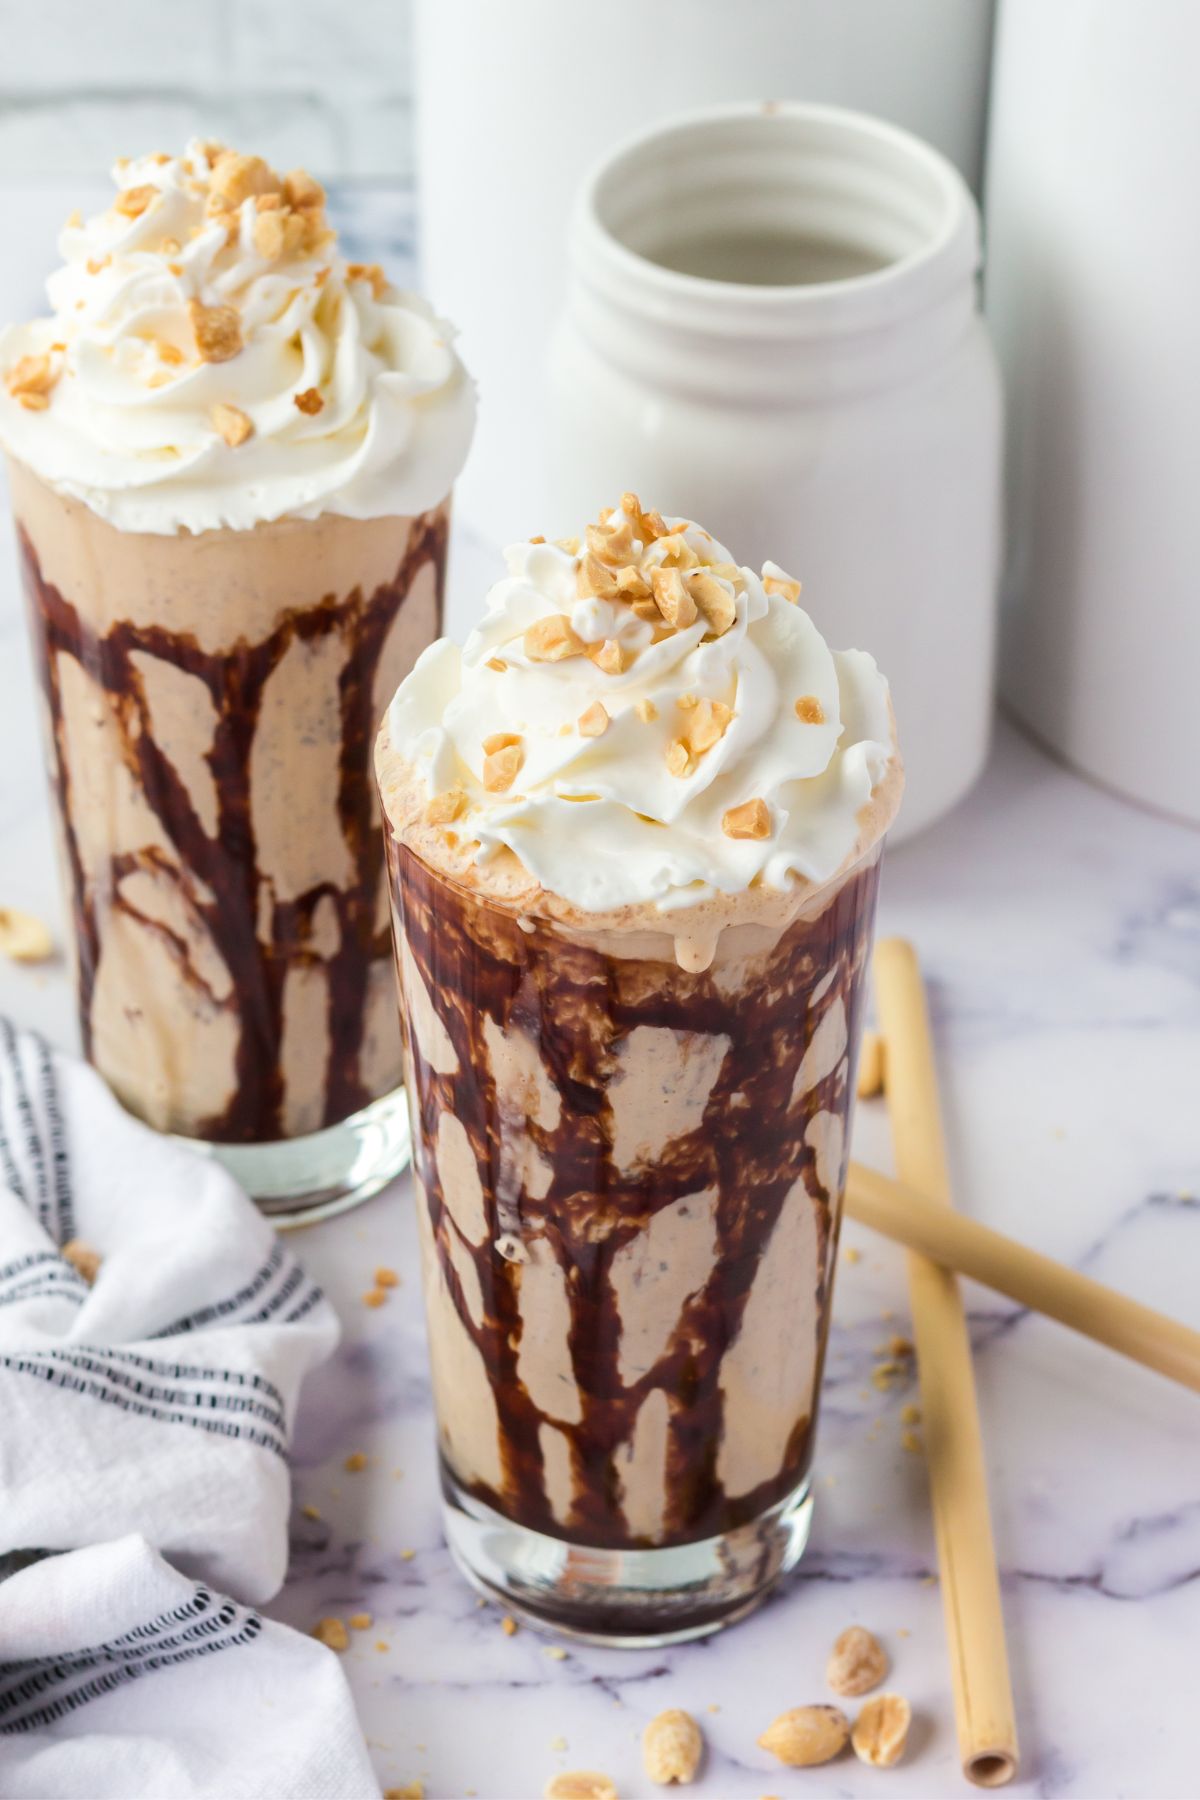 two milkshakes with chocolate sauce drizzled on the inside and topped with whipped cream and peanuts